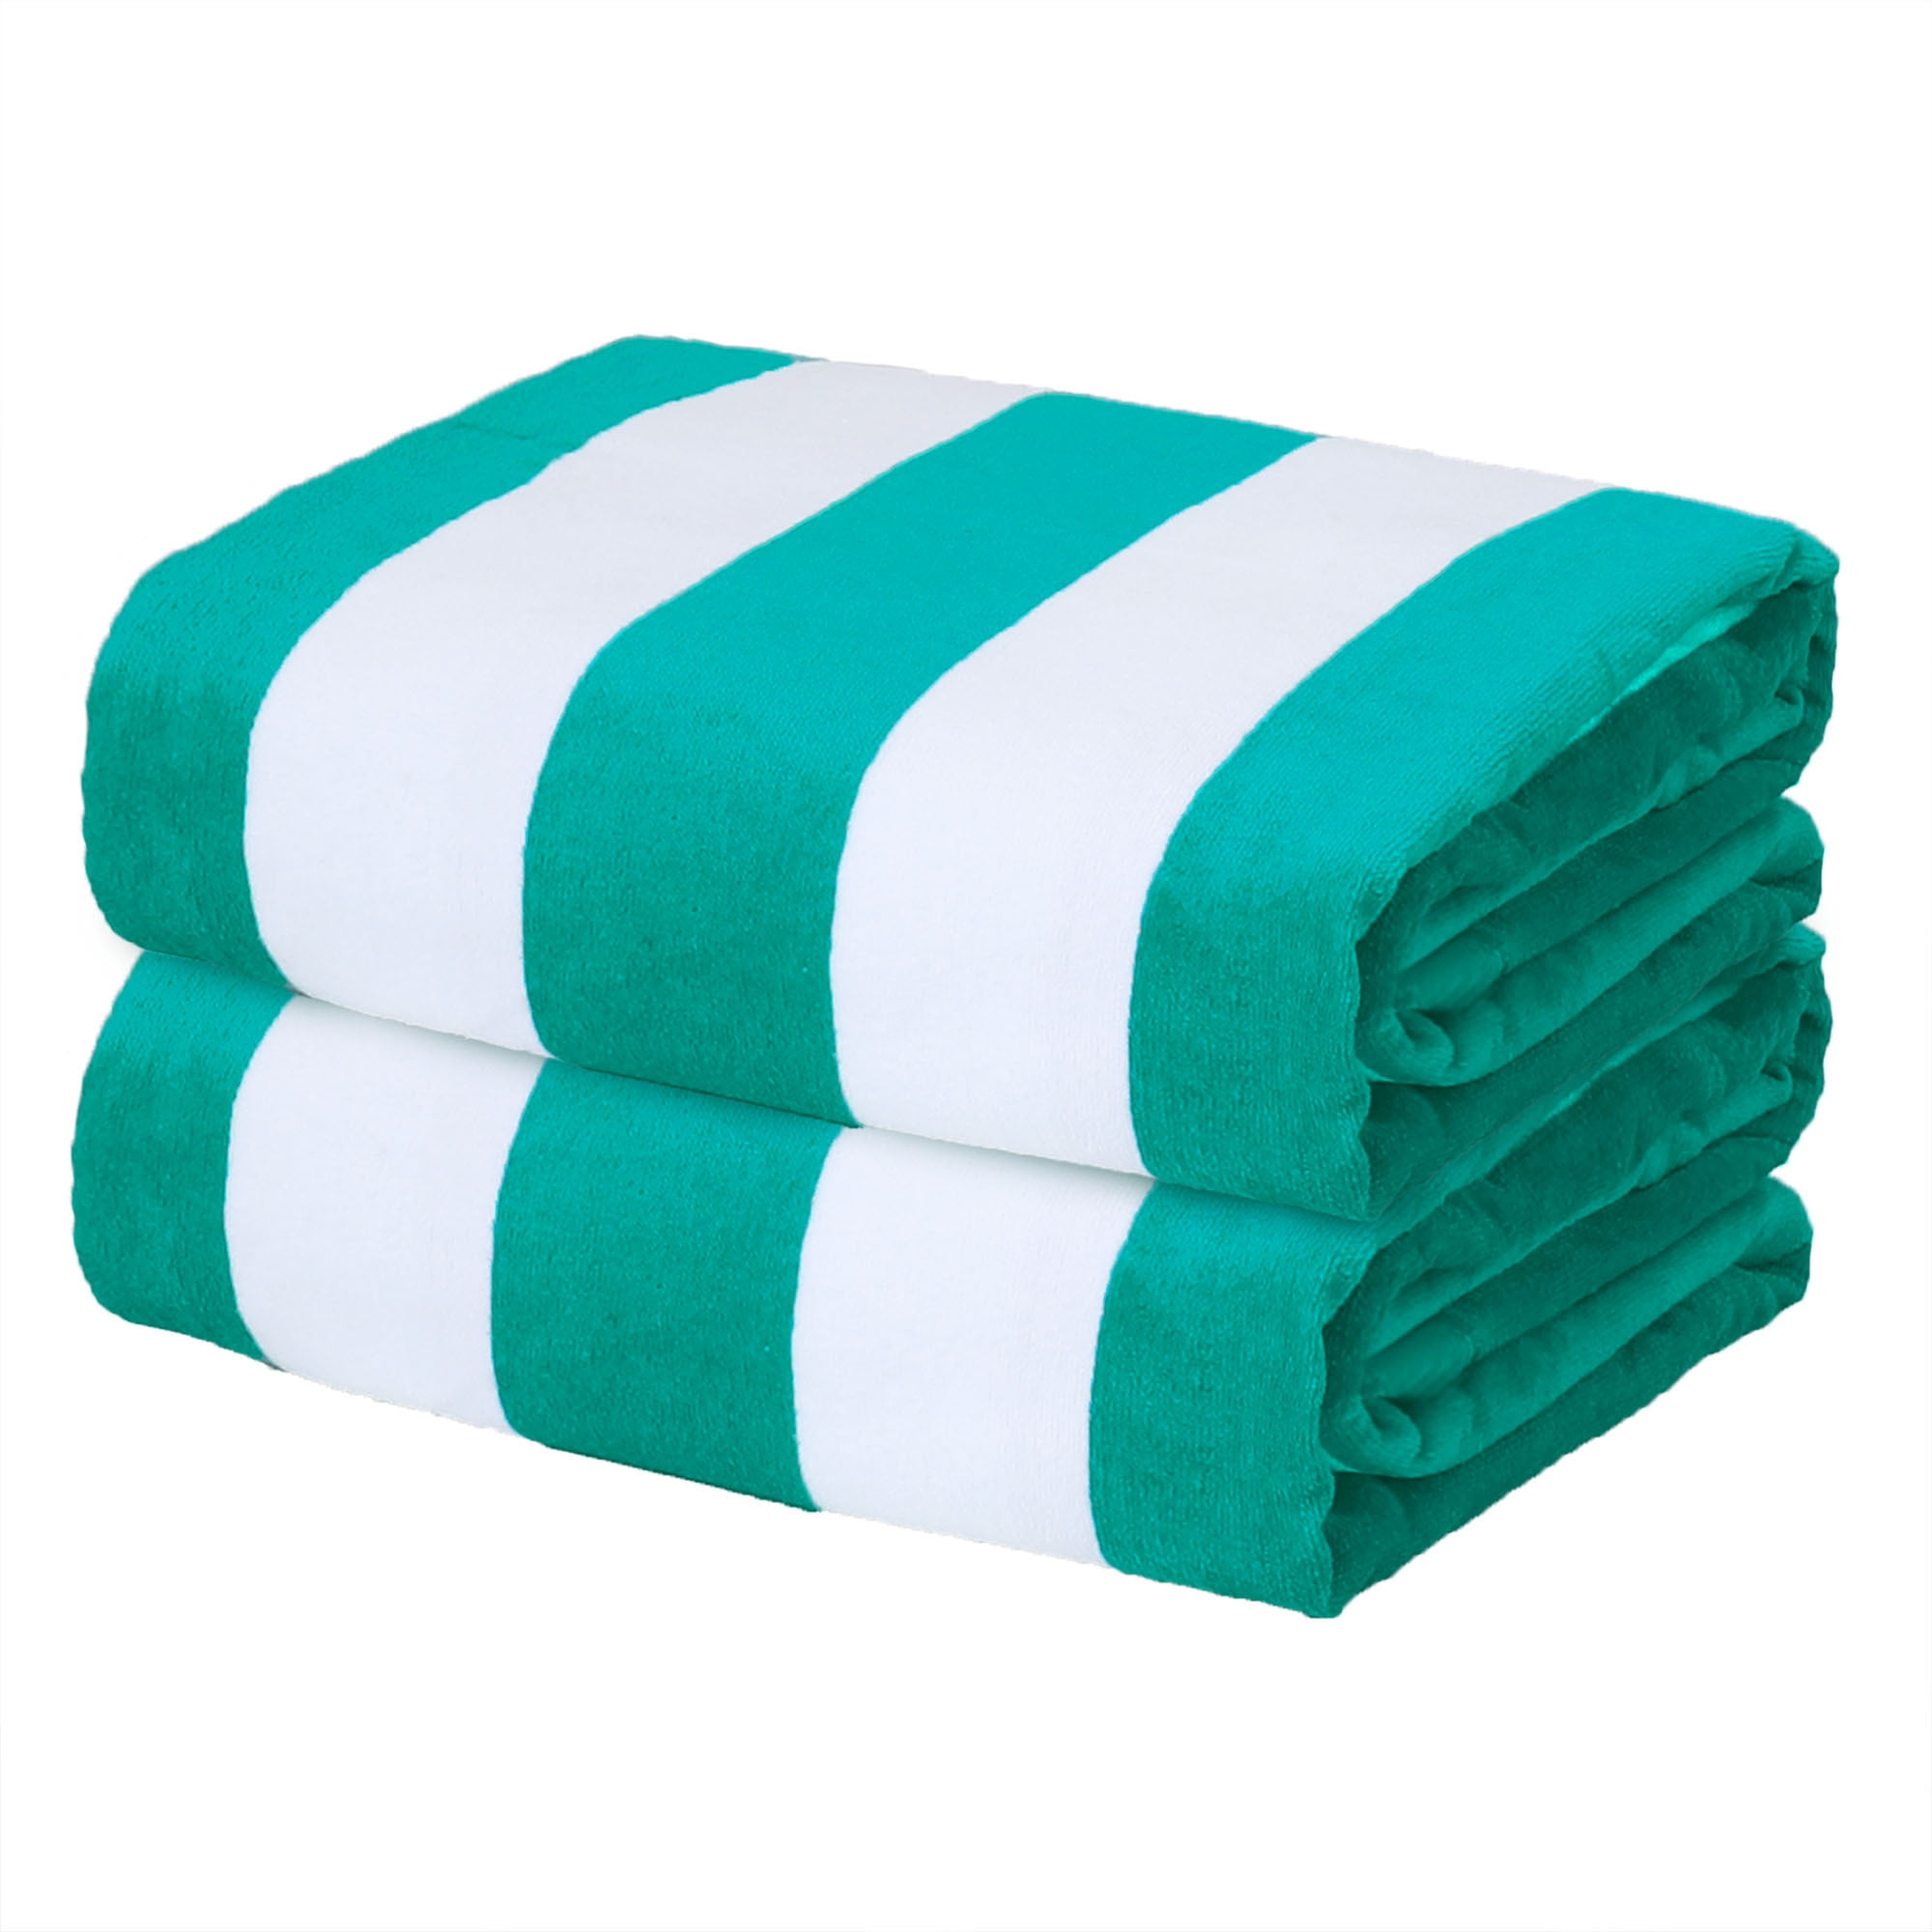 Utopia Towels Cabana Stripe Beach Towels (4 Pack, 30 x 60 inches) - Large Pool Towels, Variety